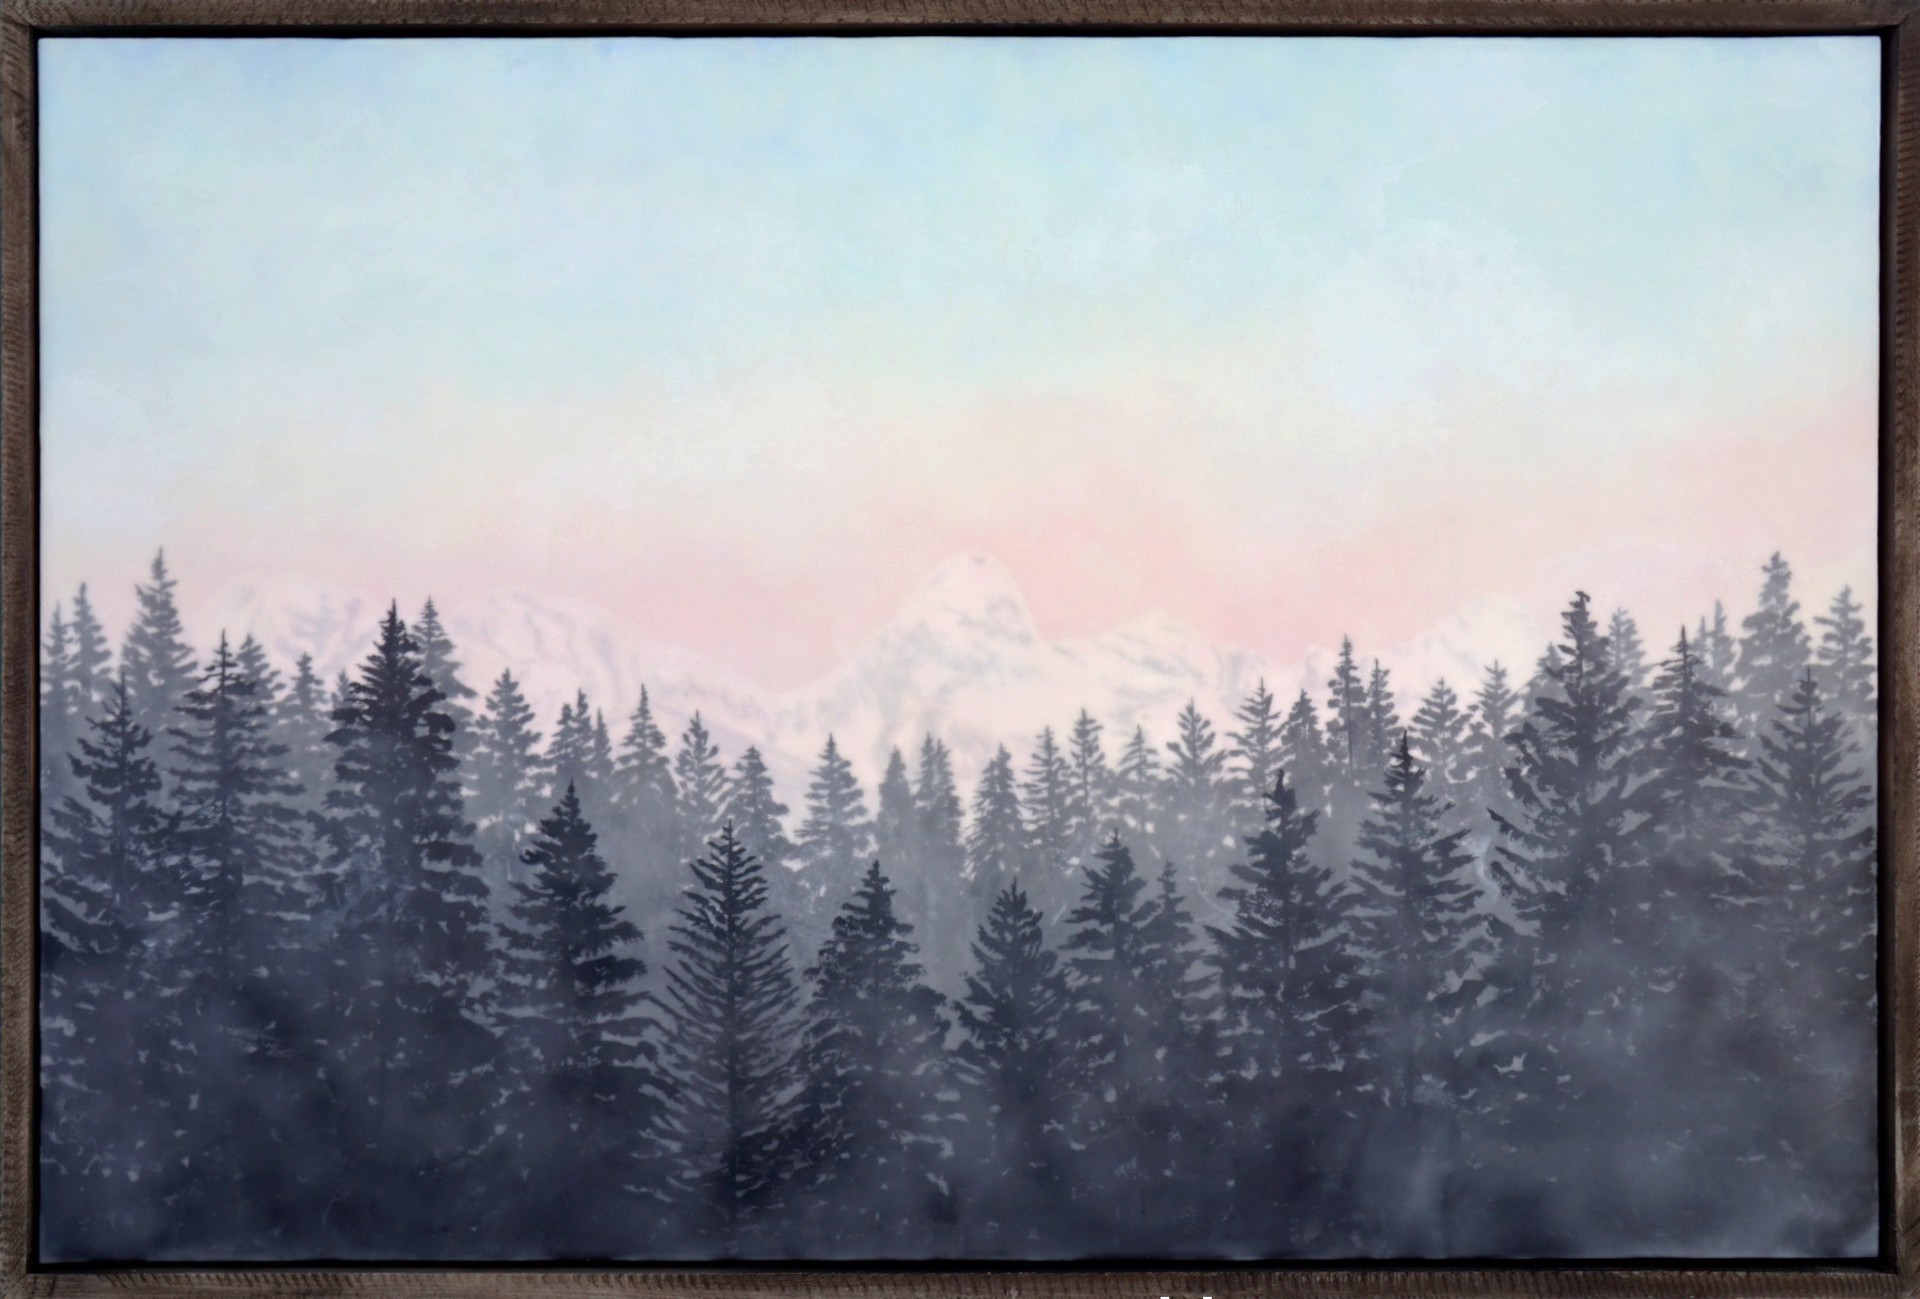 A Landscape Painting Made With Encaustic And Milk Paint Of Pine Trees And The Tetons In The Distance By Bridgette Meinhold